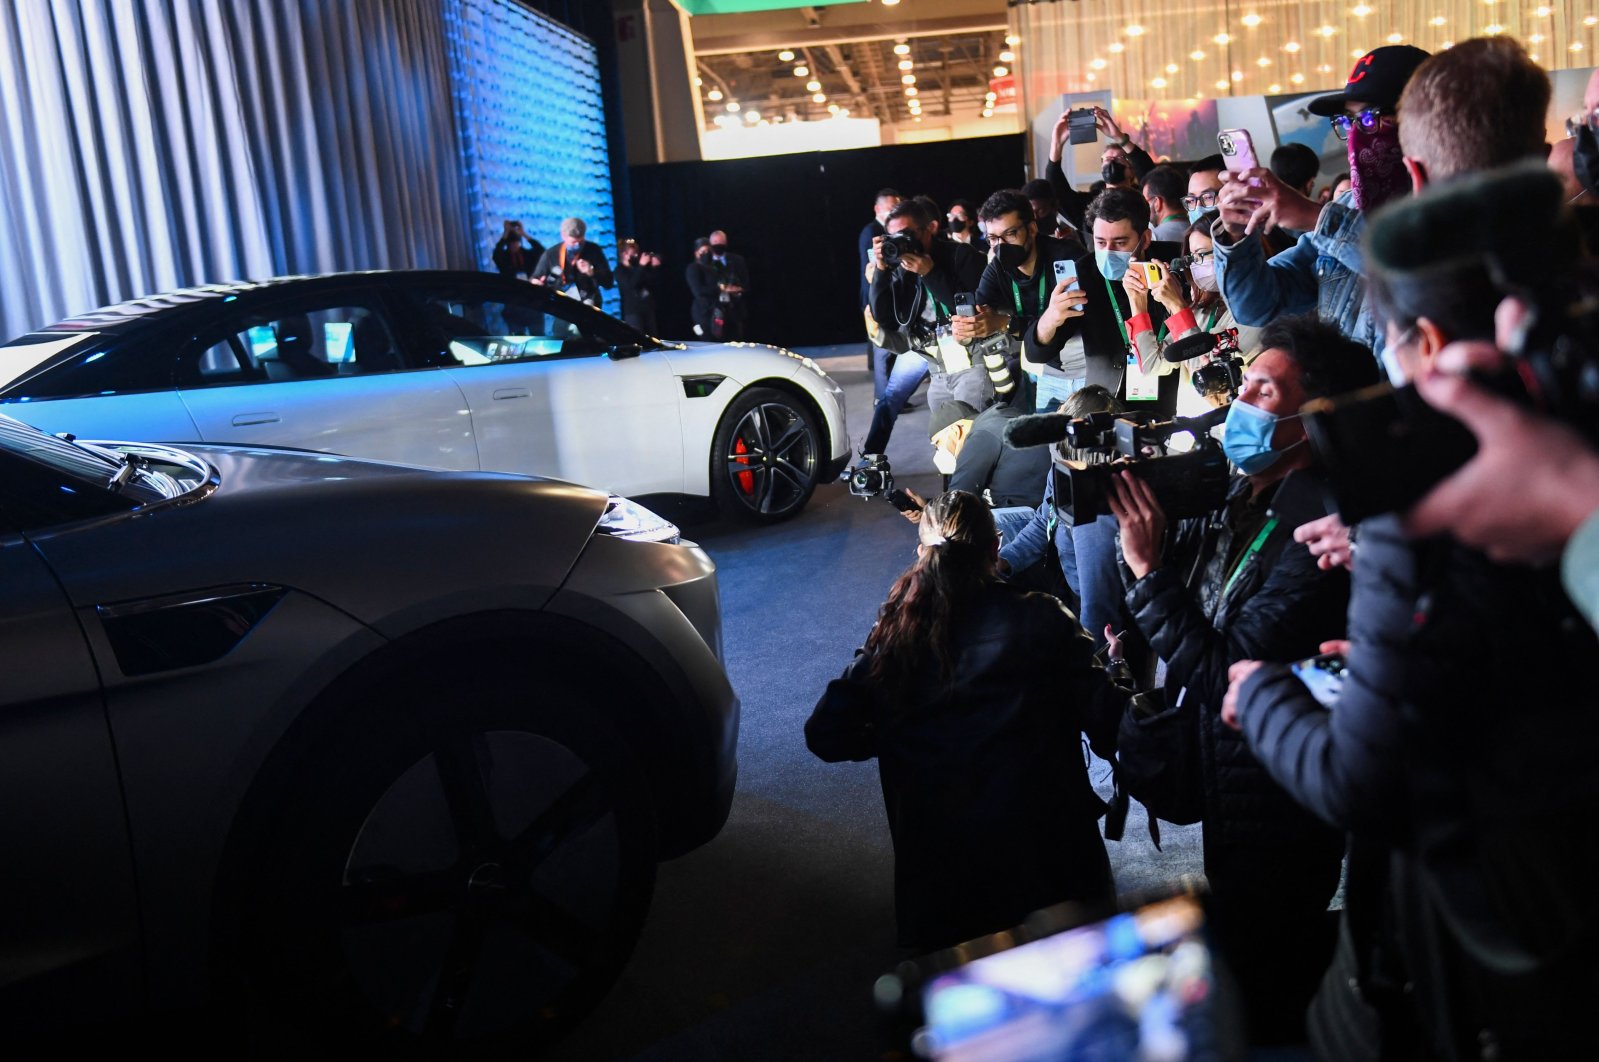 A crowd of attendees wear face masks as they photograph the Sony Vision-S SUV prototype electric vehicle after it is unveiled during the Sony press conference ahead of the Consumer Electronics Show (CES), Las Vegas, U.S., Jan. 4, 2022. (AFP Photo)